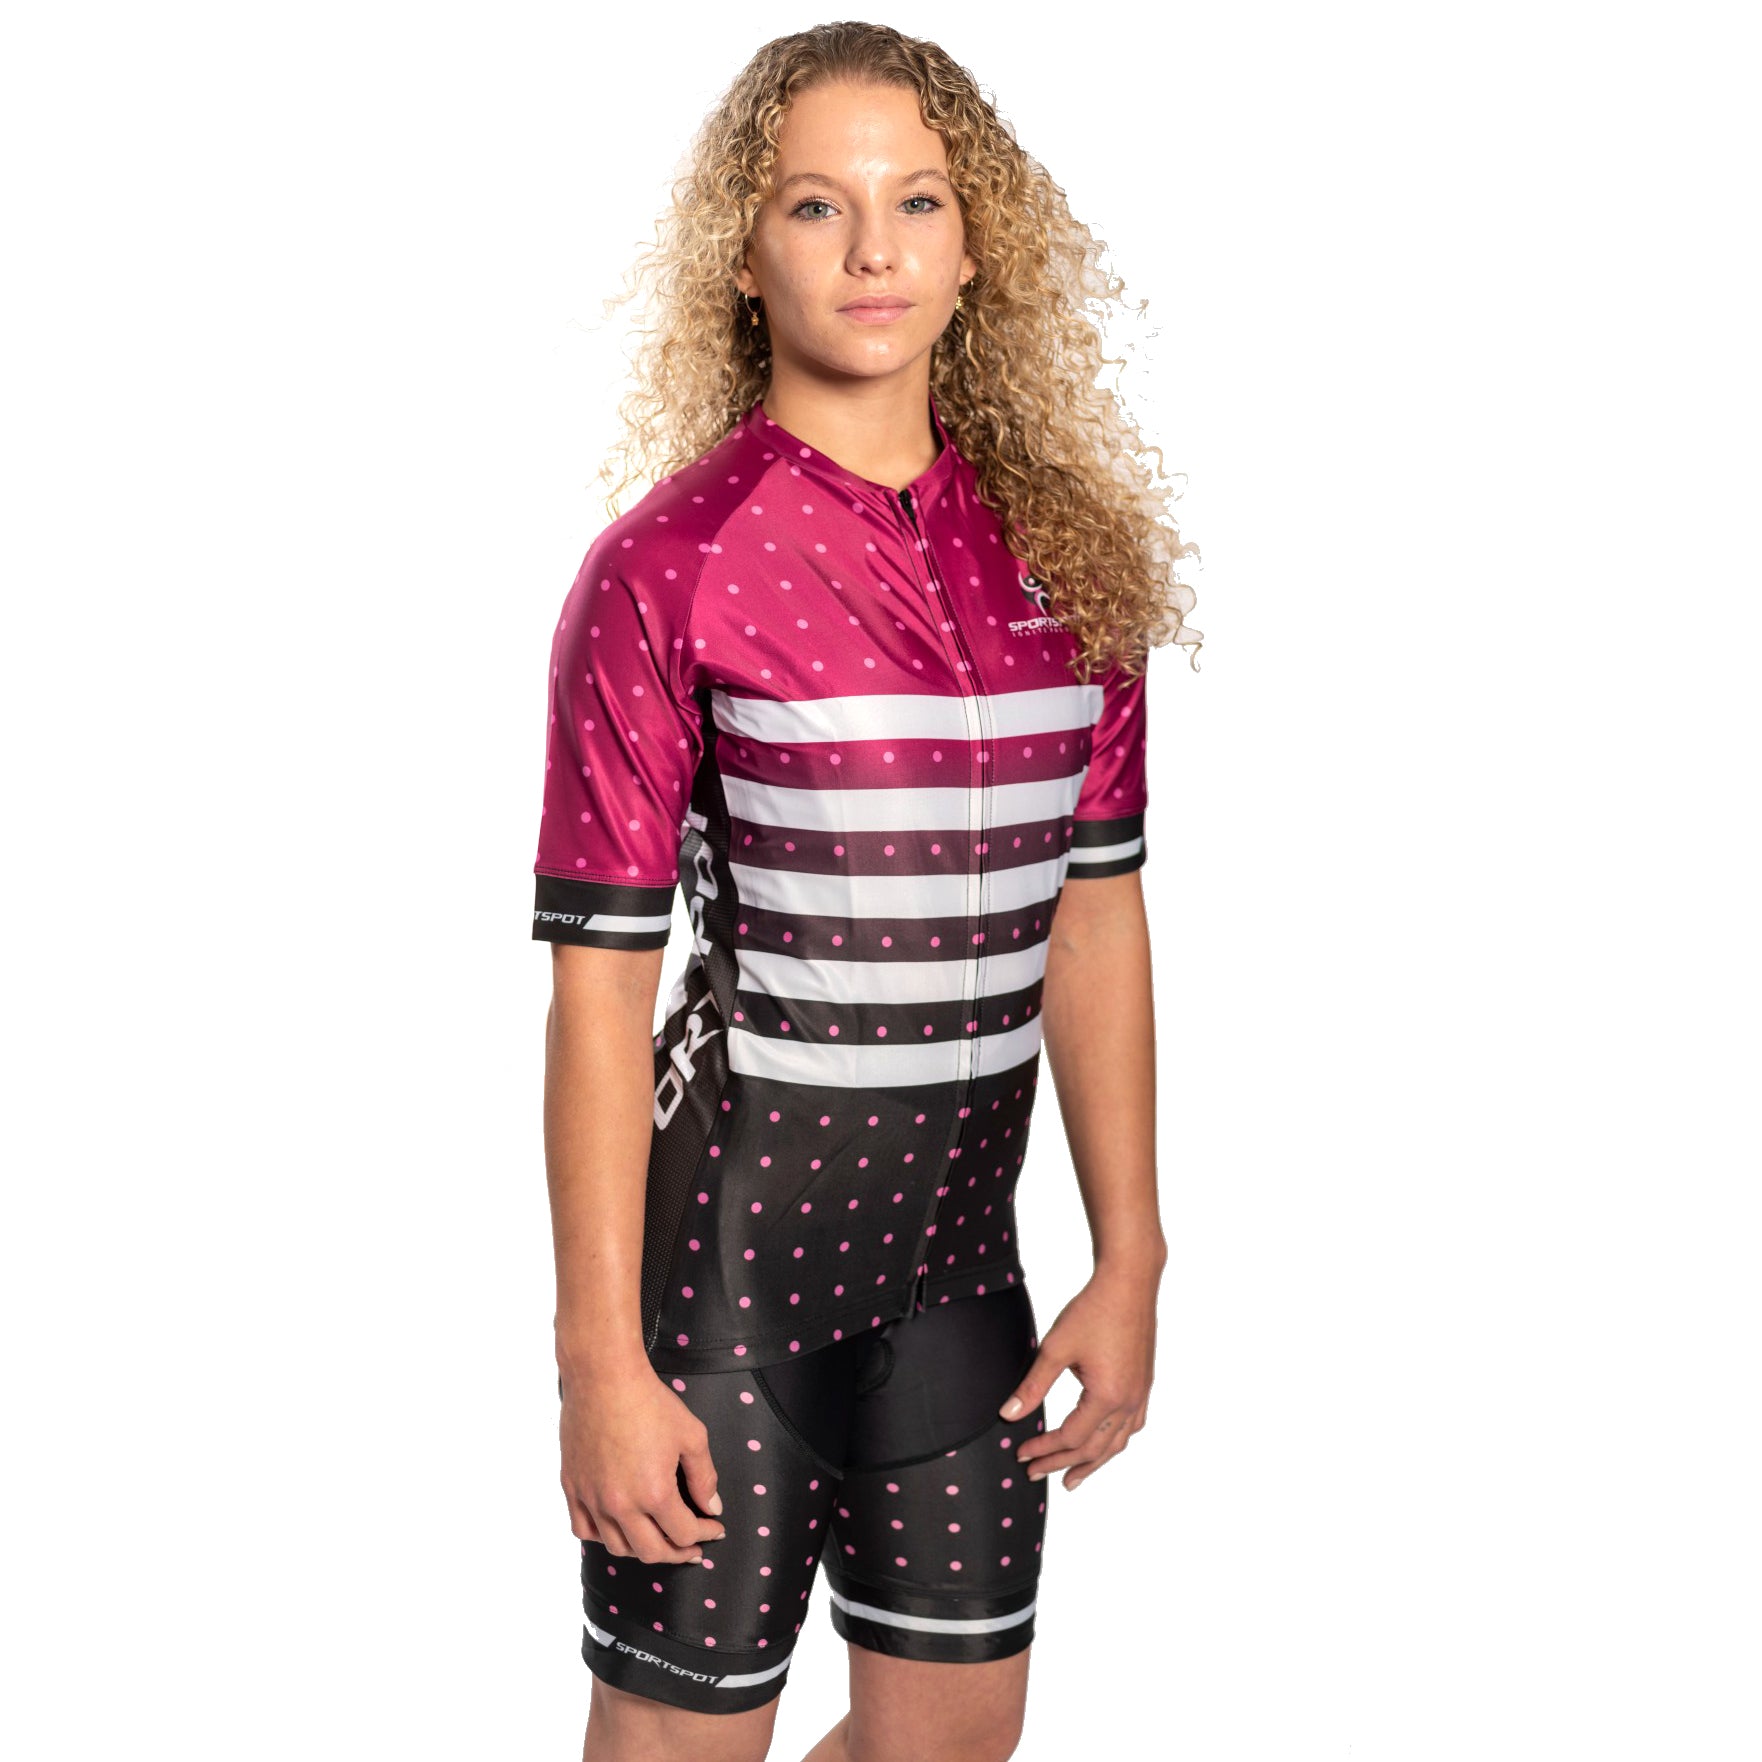 SuperLite Cycling Suit with Bib Shorts